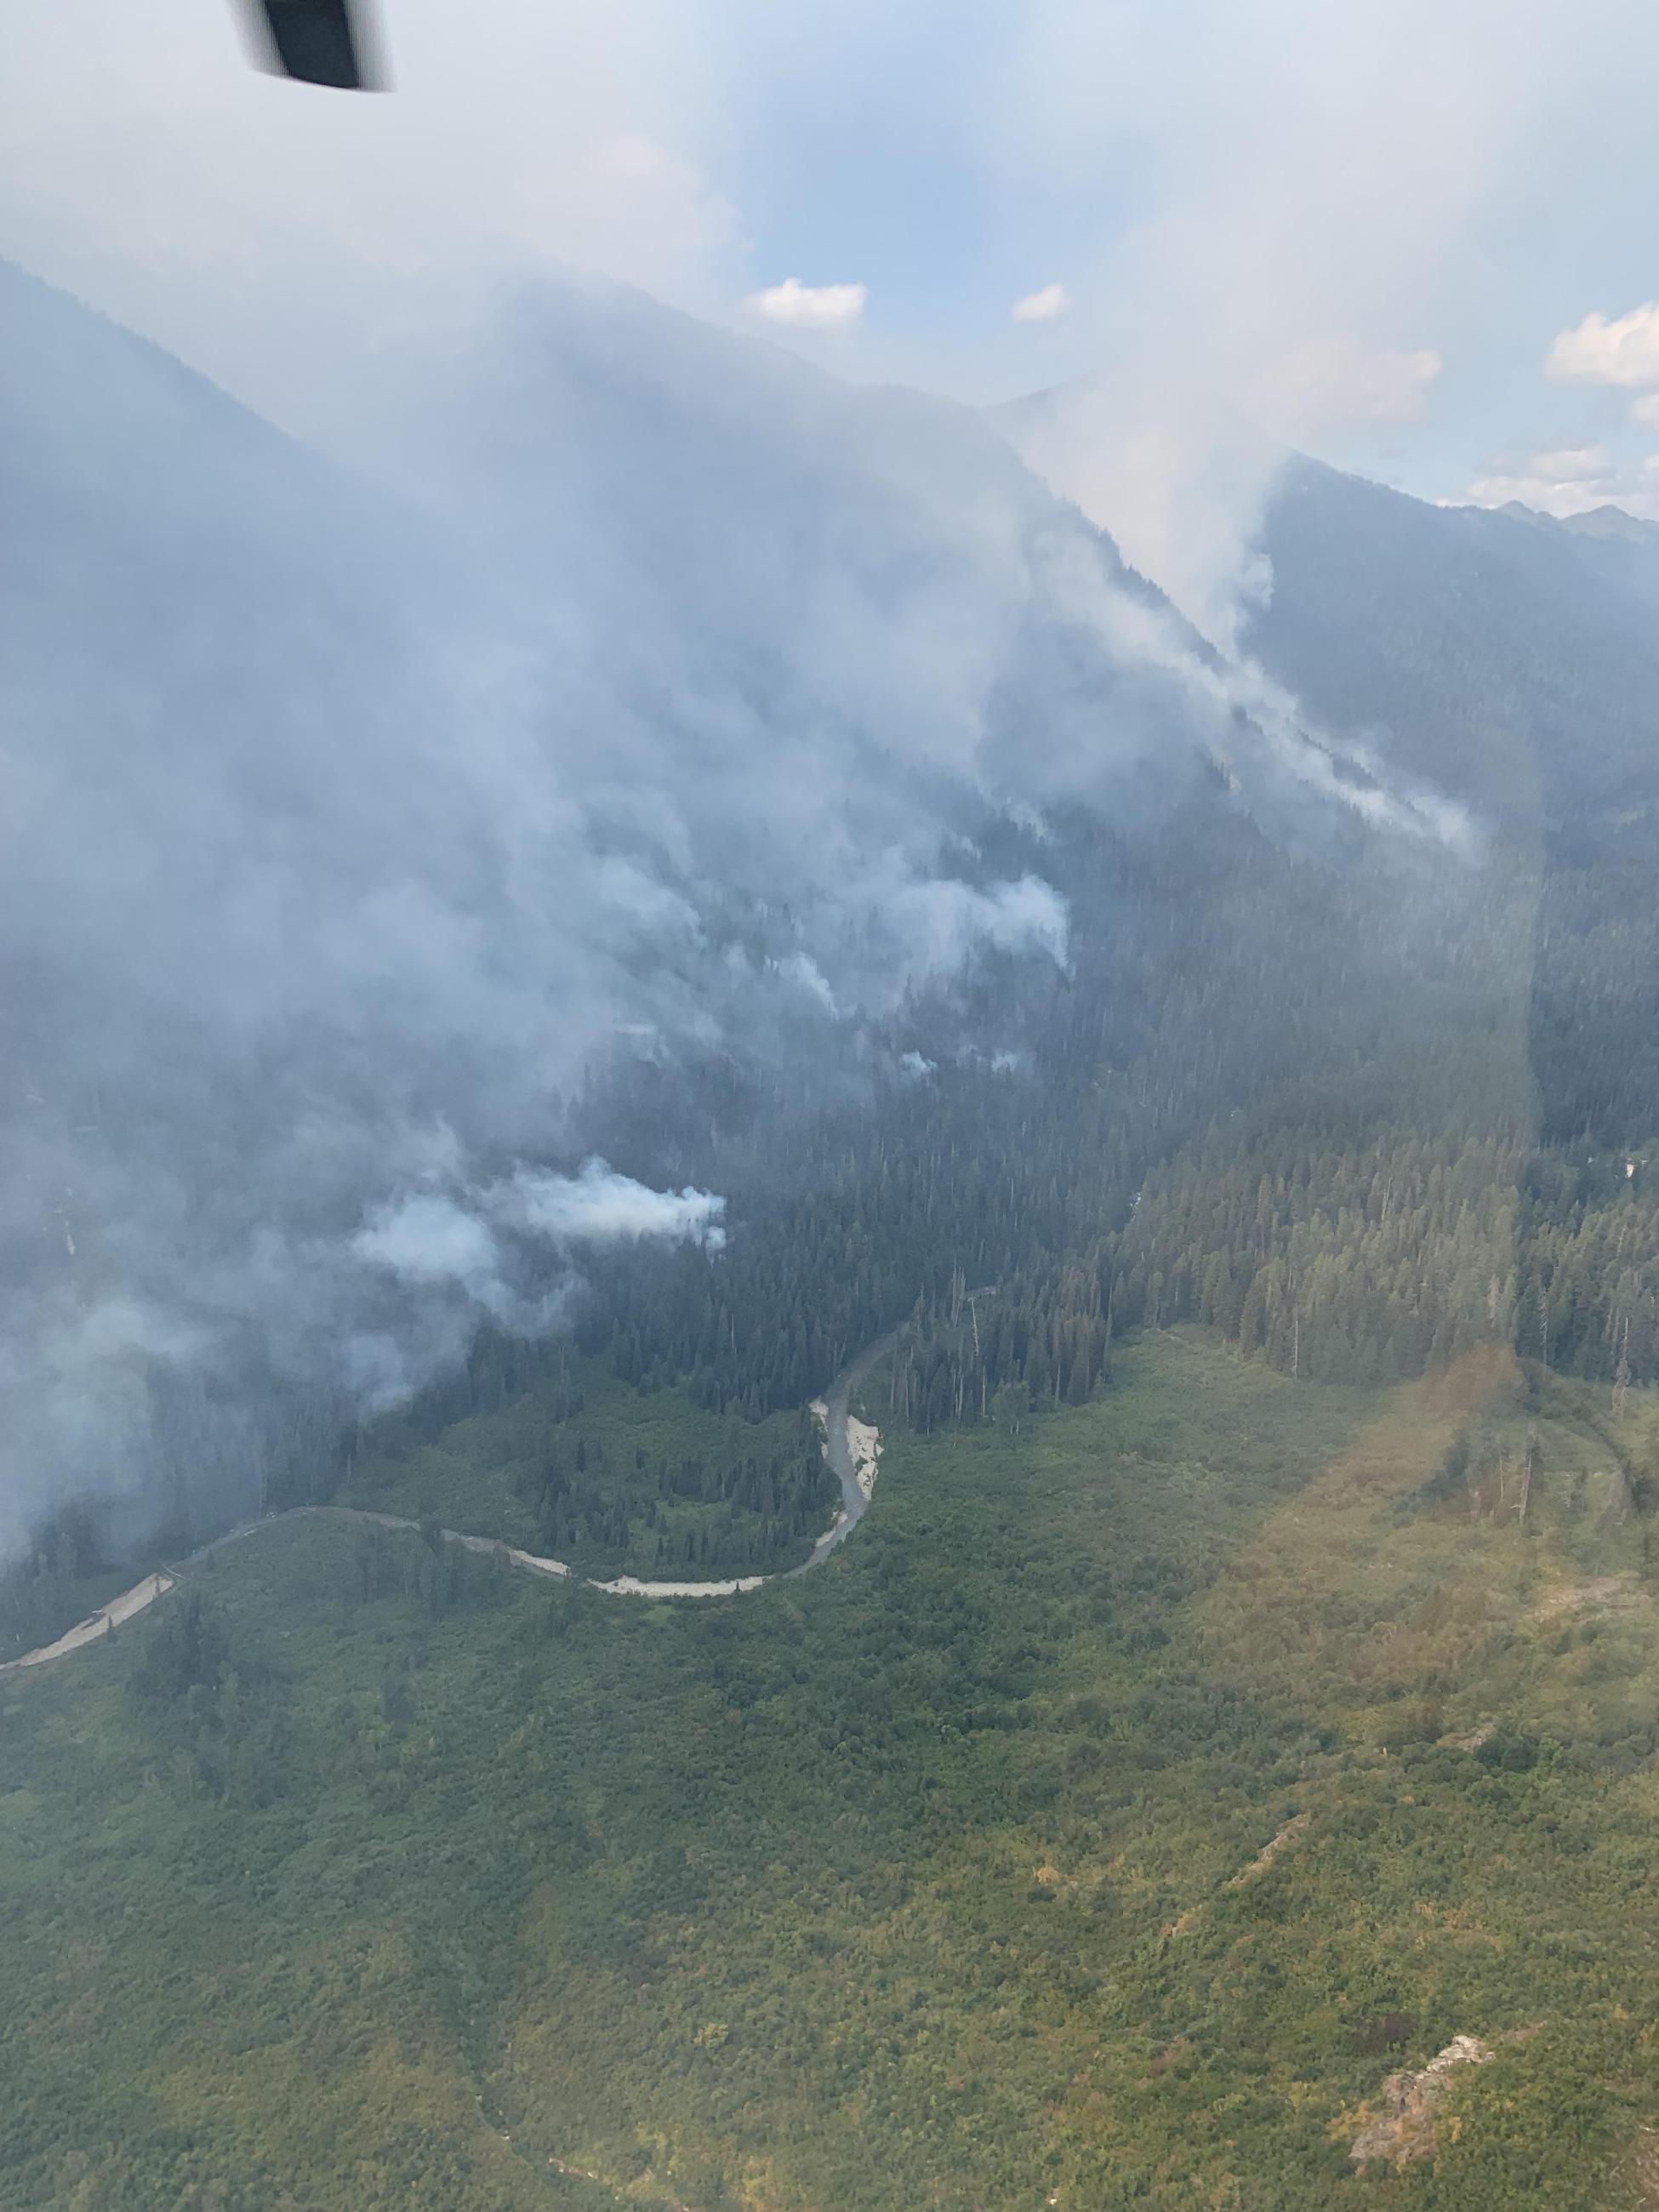 Smoke covers a heavily treed hillside where the Airplane Lake Fire is burning. A river is seen in the lower third of the photo.